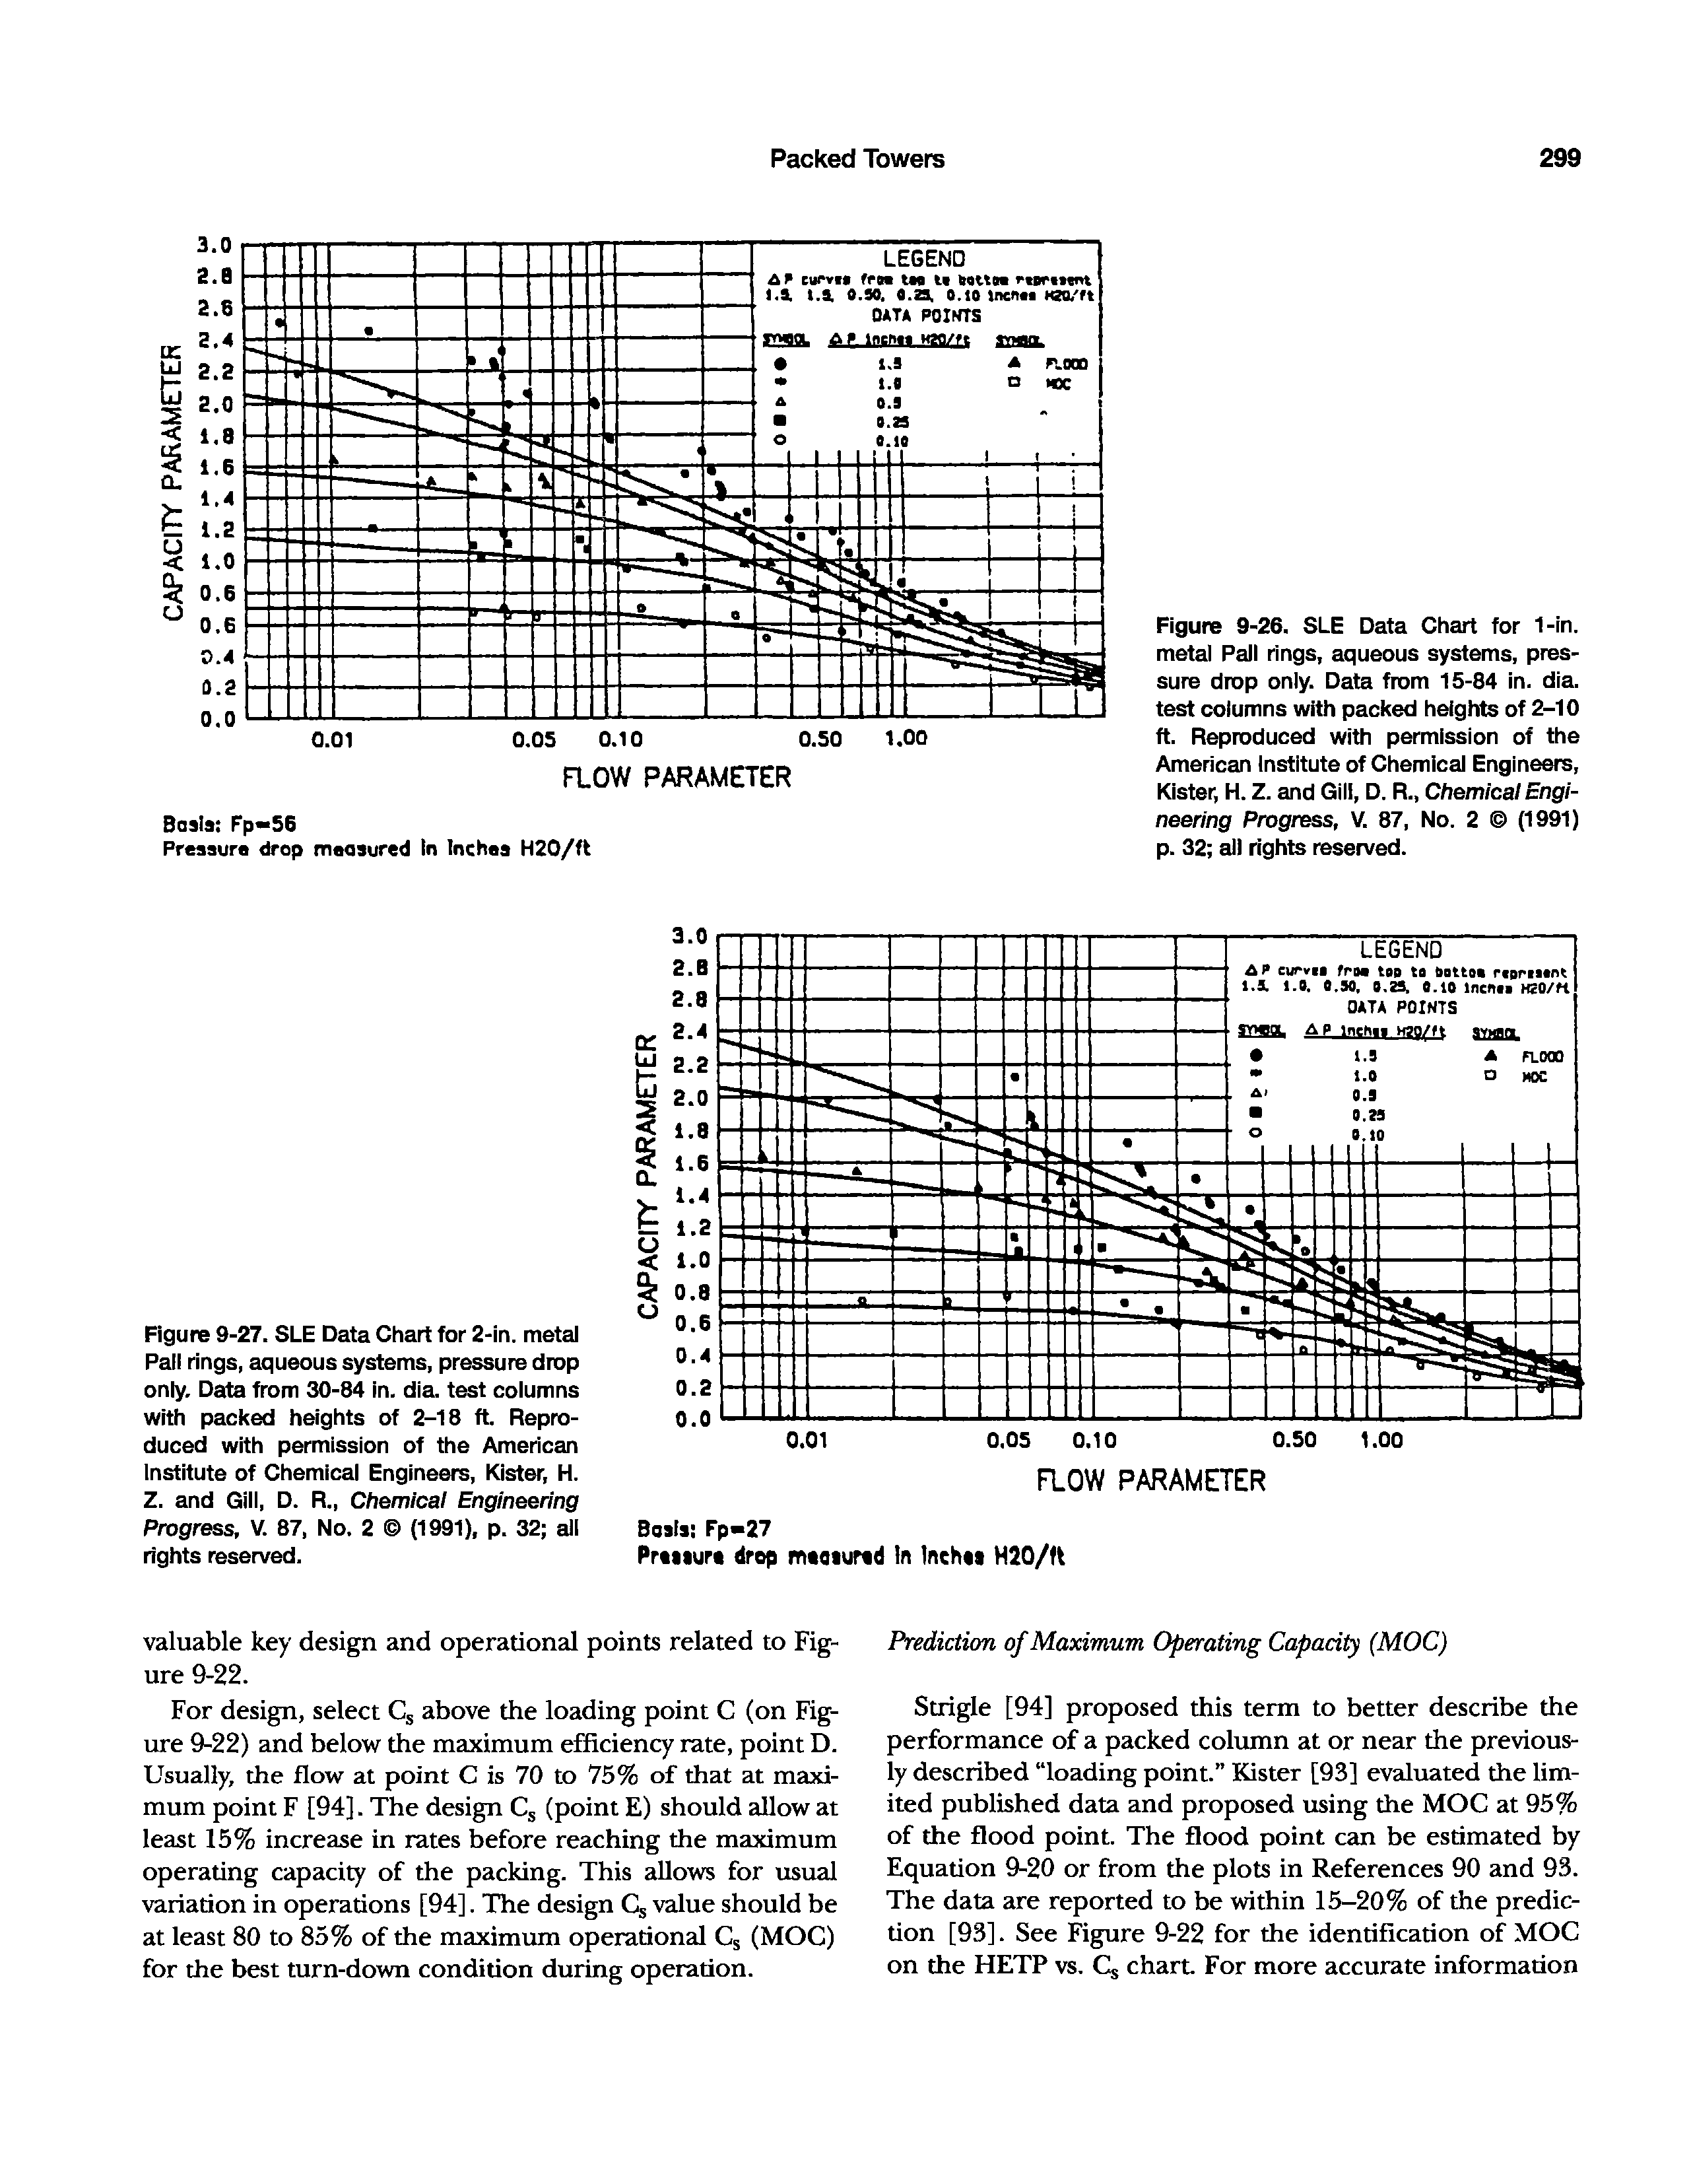 Figure 9-26. SLE Data Chart for 1-in. metal Pall rings, aqueous systems, pressure drop only. Data from 15-84 in. dia. test columns with packed heights of 2-10 ft. Reproduced with permission of the American Institute of Chemical Engineers, Kister, H. Z. and Gill, D. R., Chemical Engineering Progress, V. 87, No. 2 (1991) p. 32 all rights reserved.